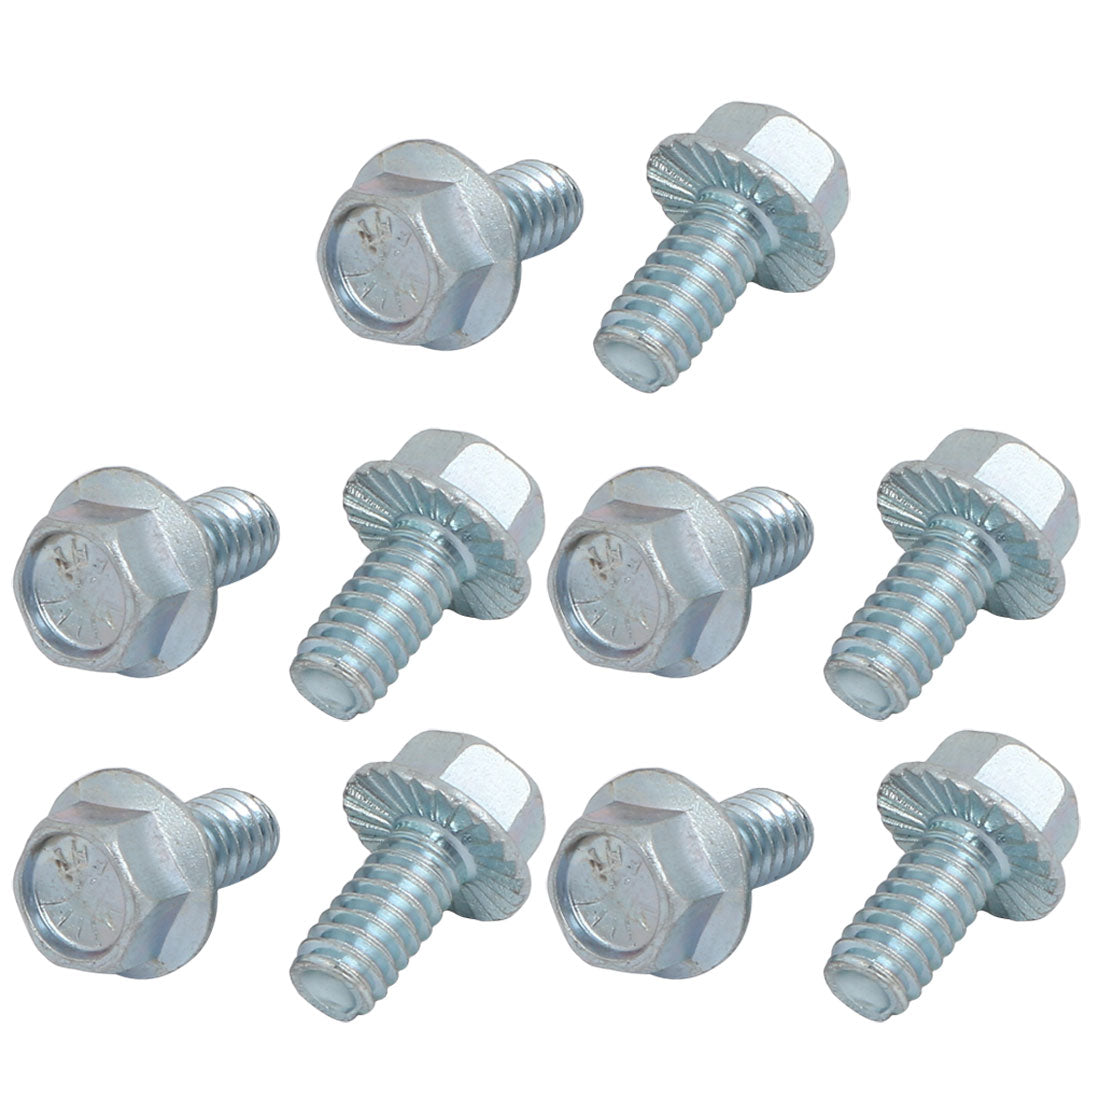 uxcell Uxcell 10Pcs 1/4-20 x 1/2 Inch Thread Carbon Steel Hex Serrated Head Flange Screw Bolt